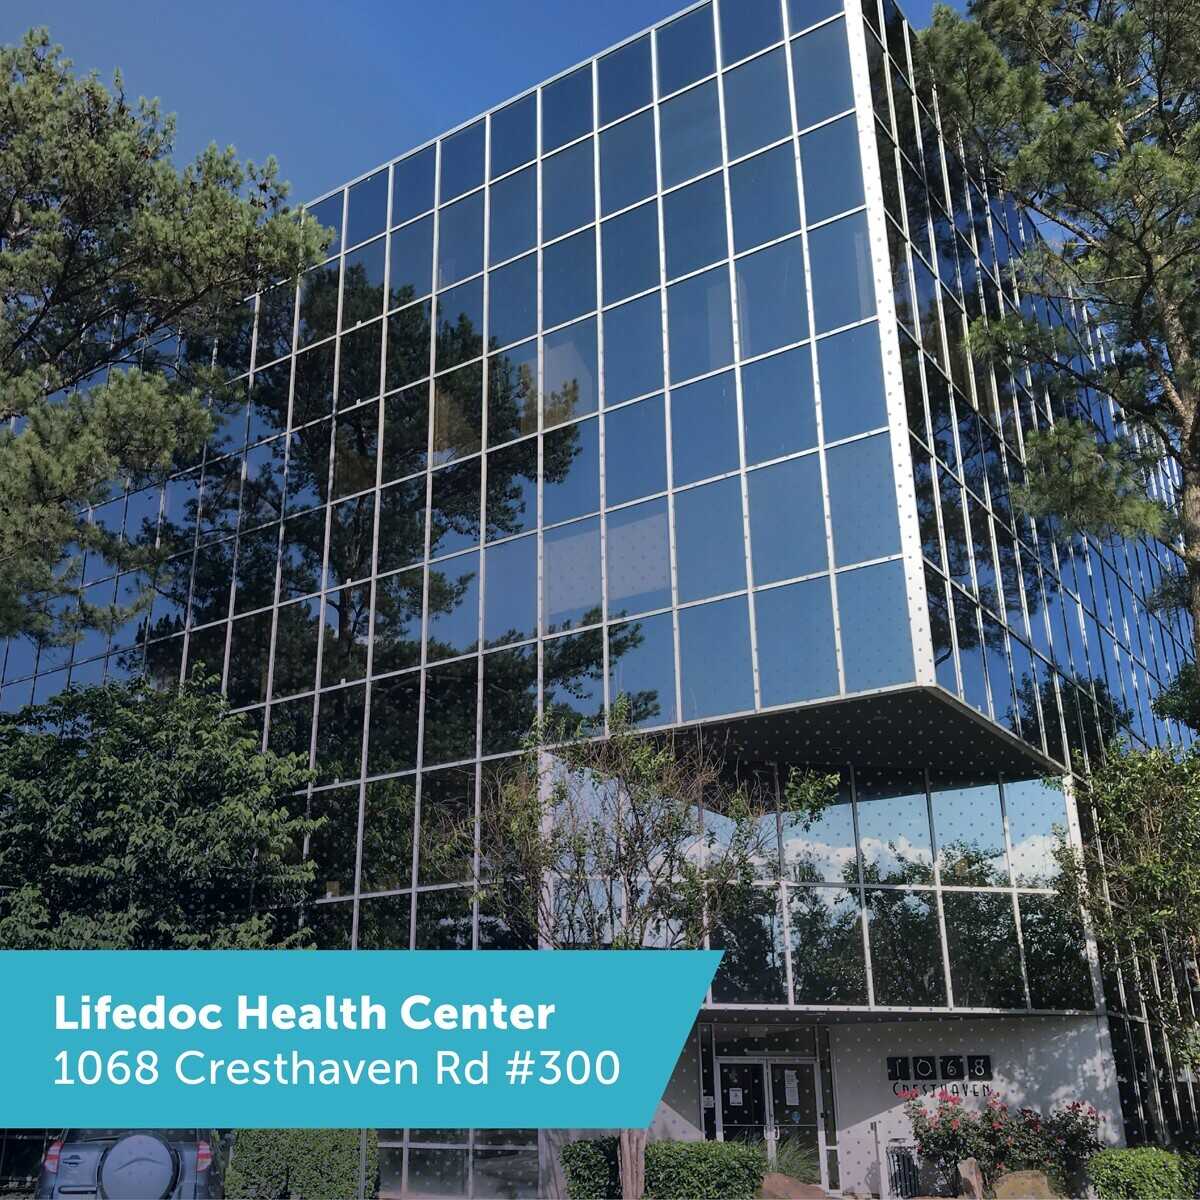 Lifedoc Health building and address